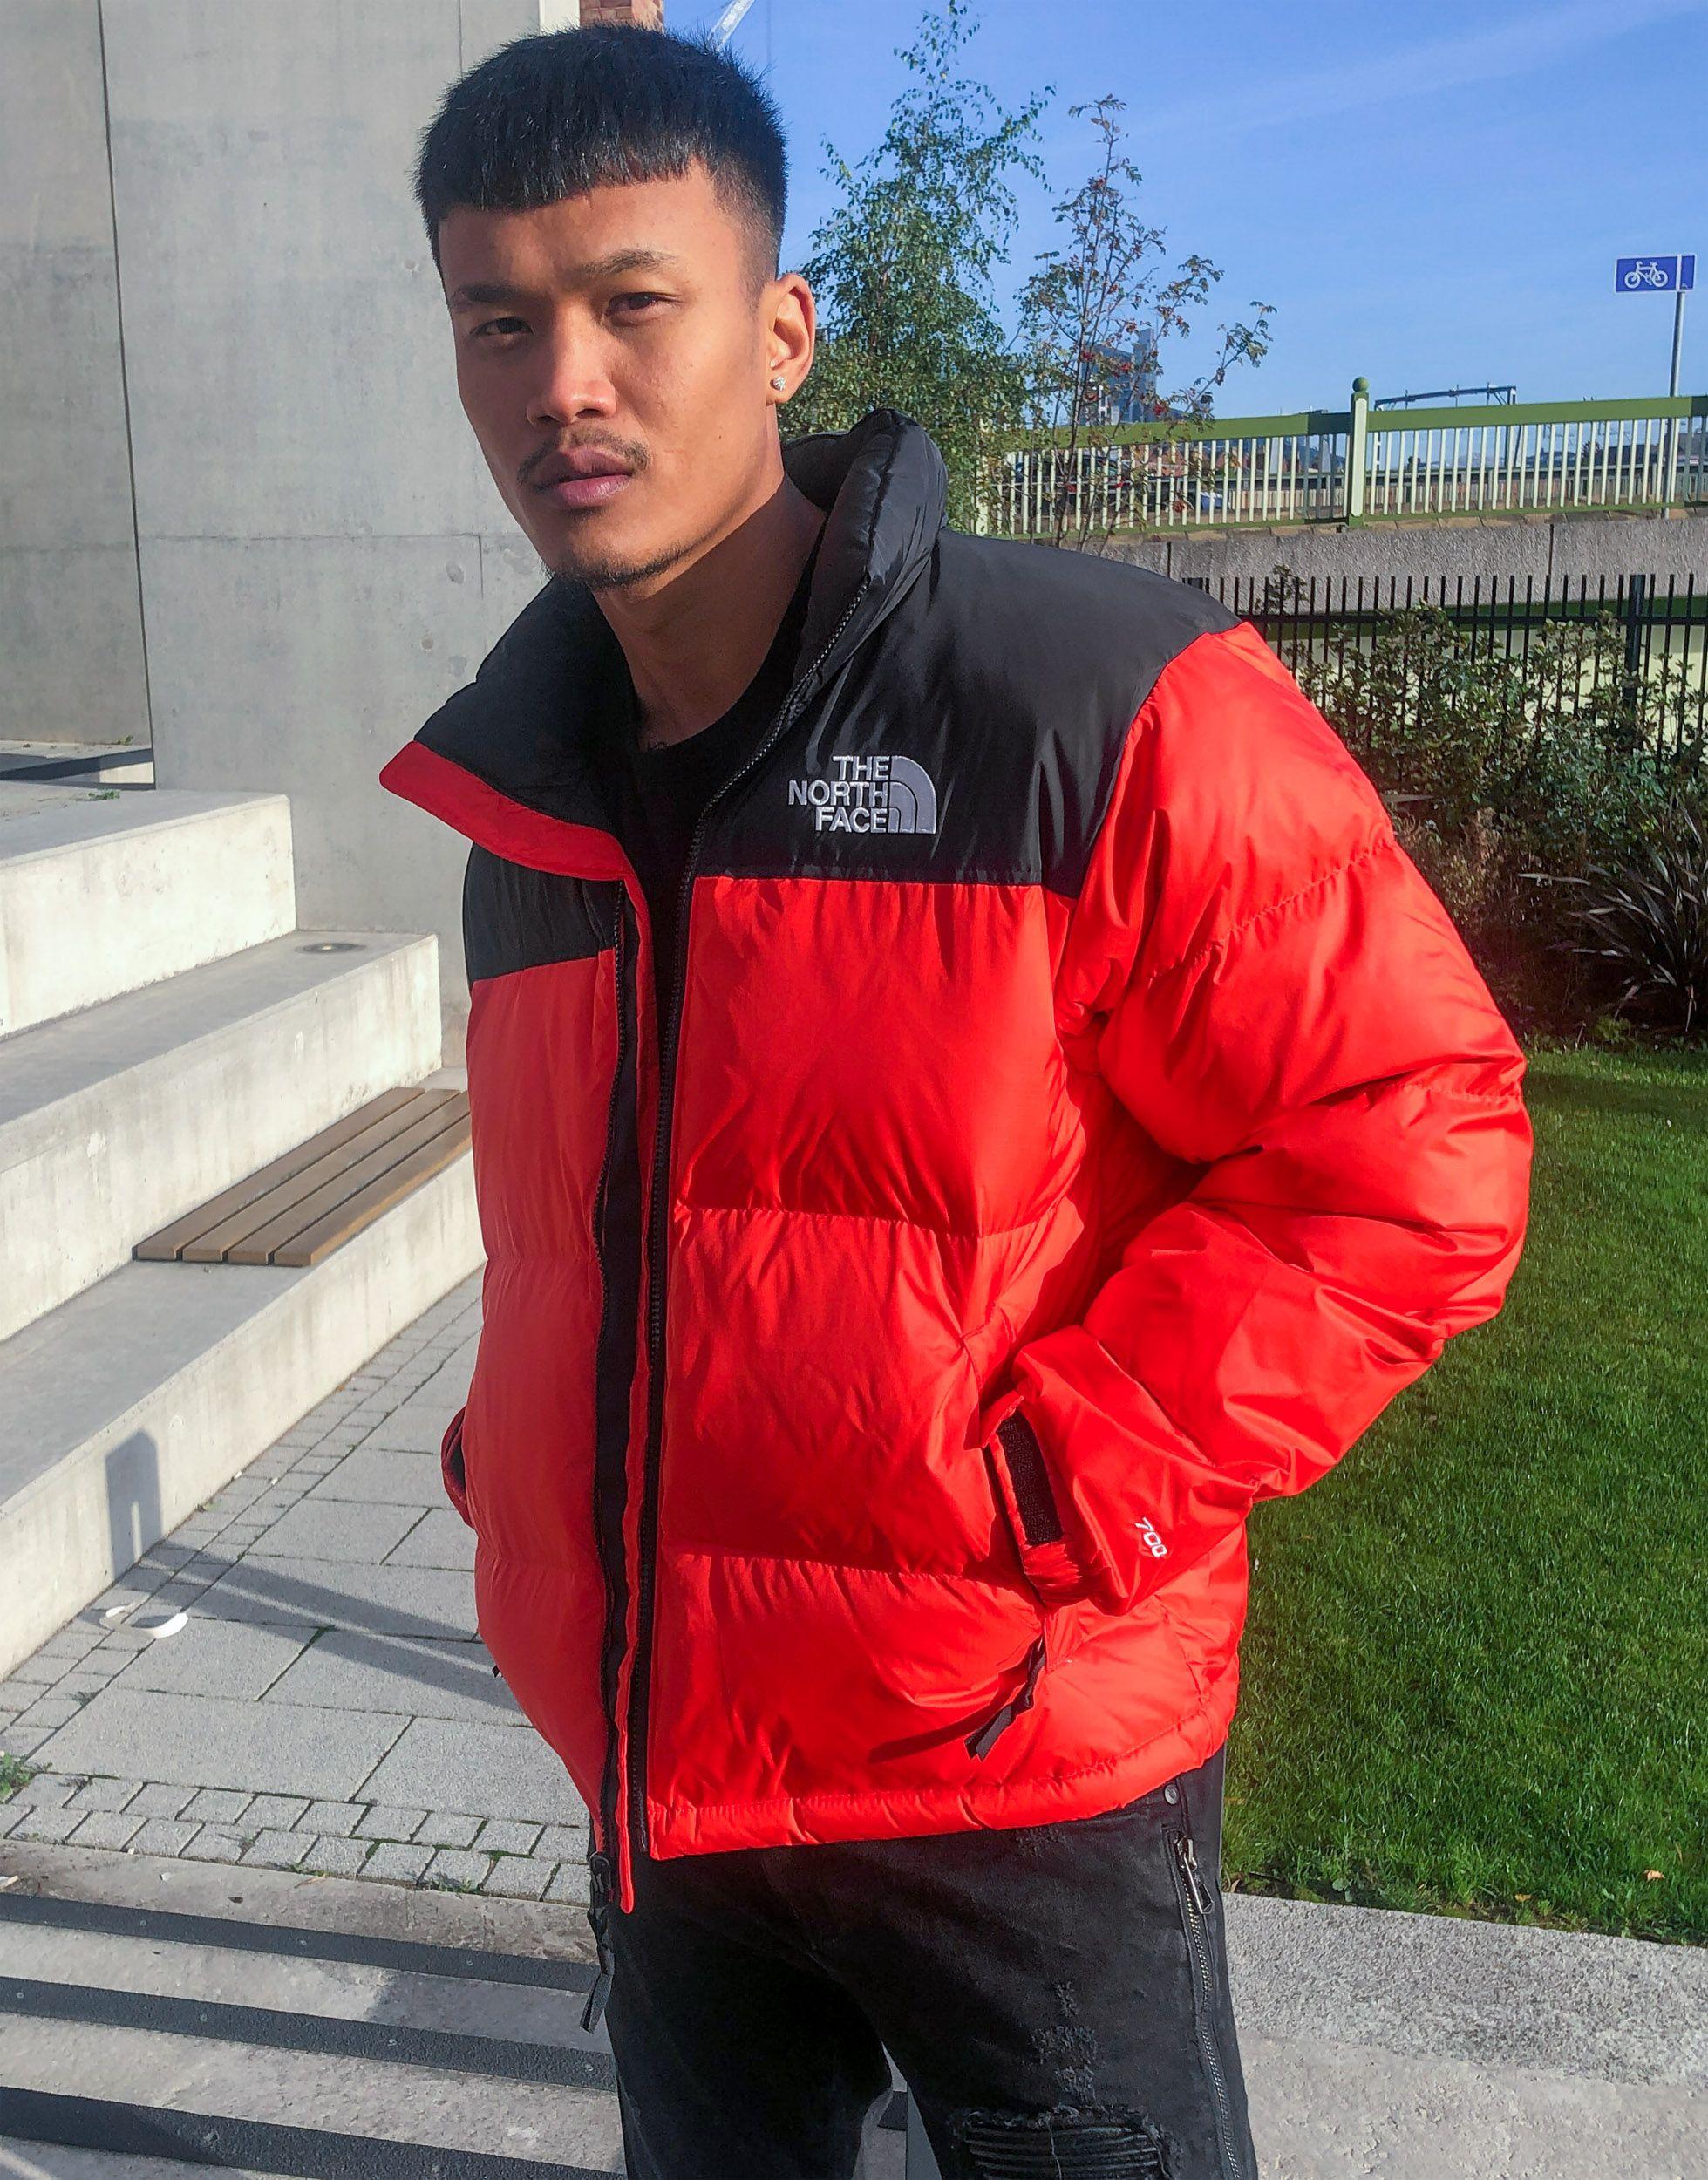 The North Face 1996 Retro Nuptse Jacket in Red for Men - Lyst